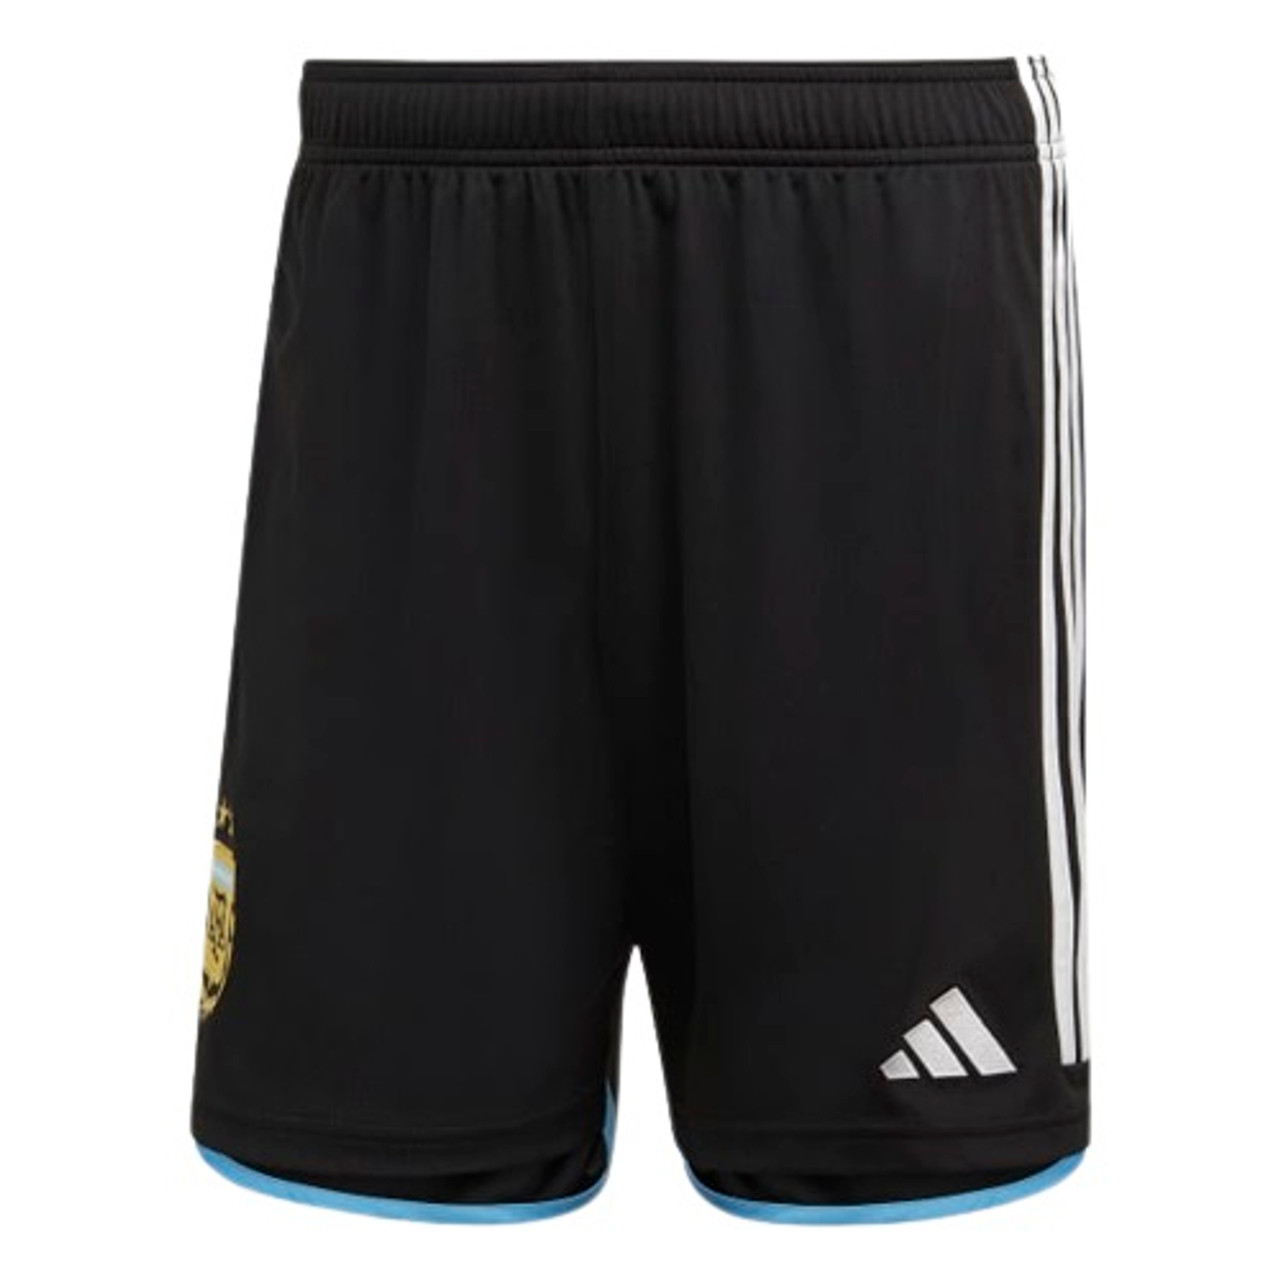 Official Selección Argentina Soccer Jersey & Black Short - FIFA WorldCup Qatar 2022 Edition Pampa Direct